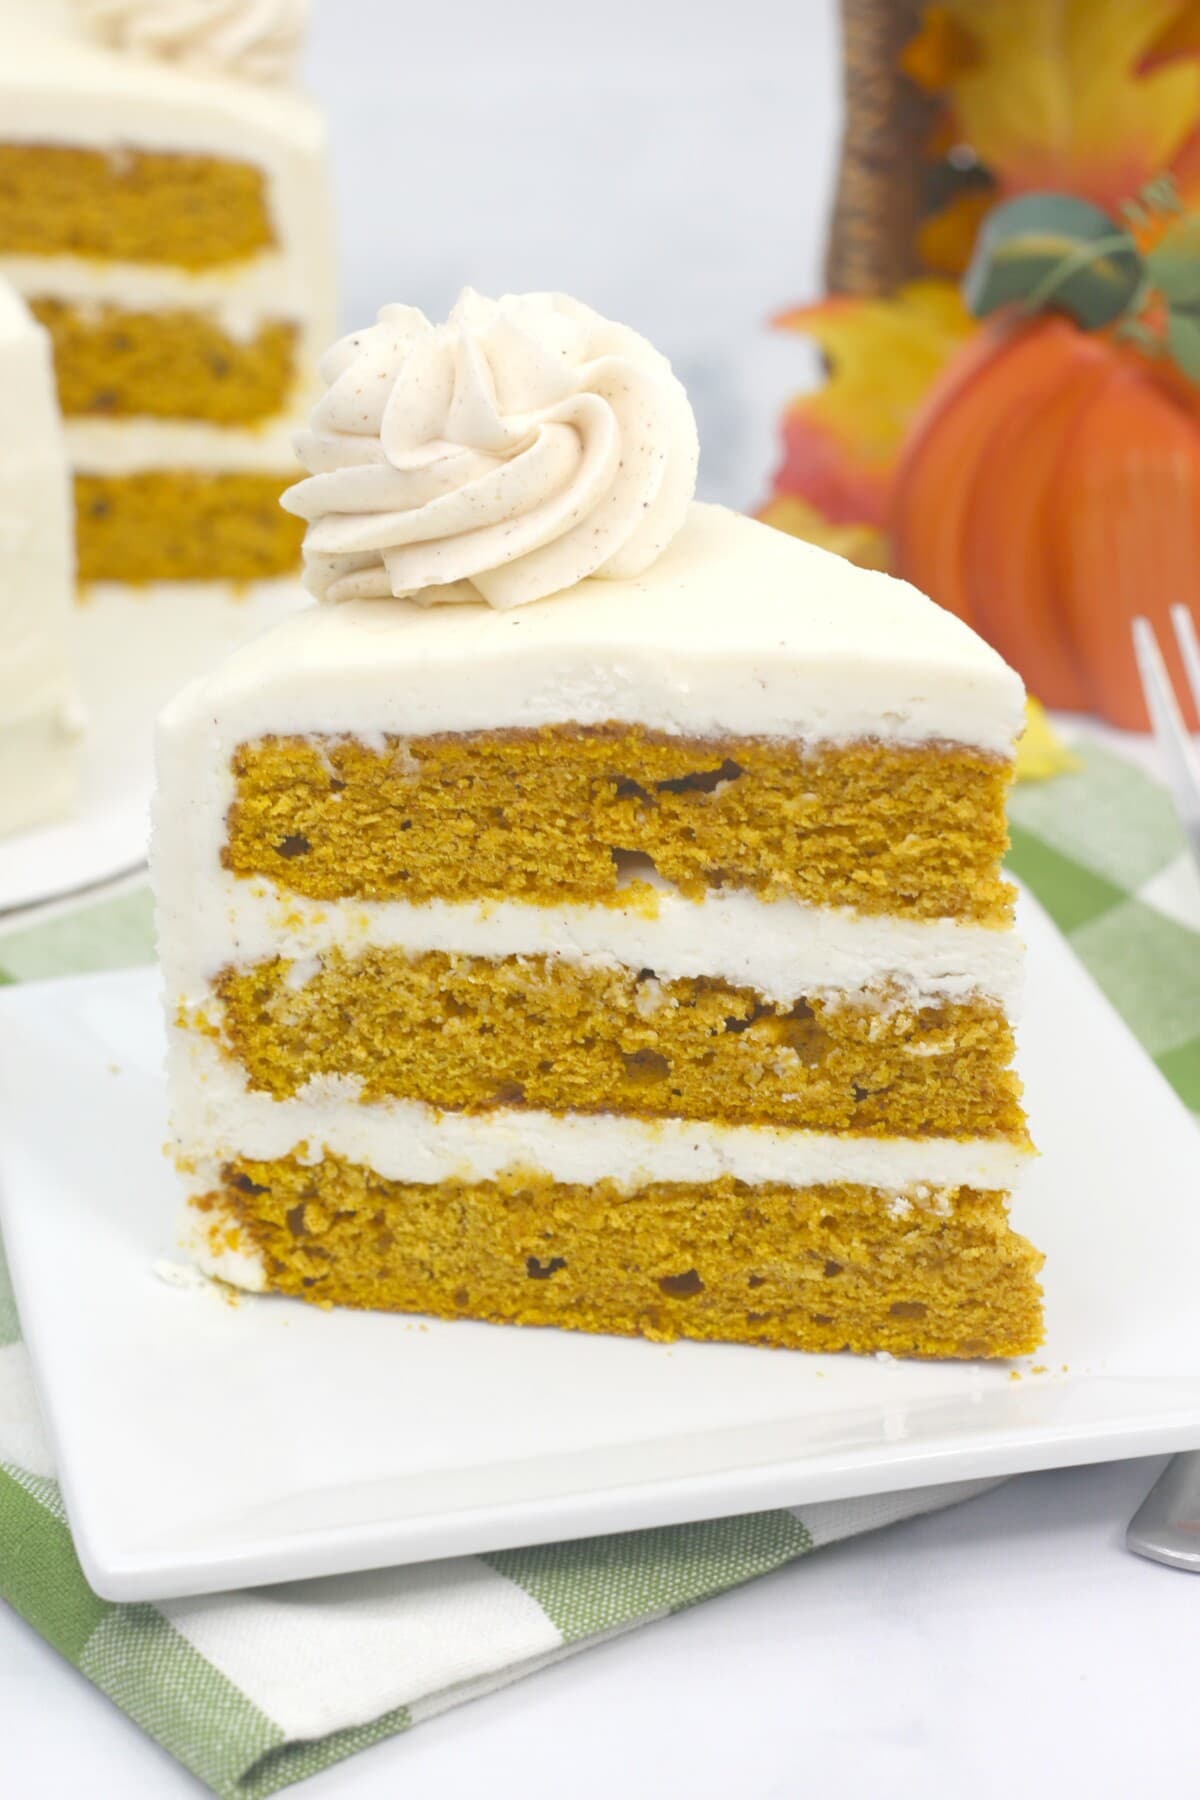 Pumpkin layer cake with frosting on top.